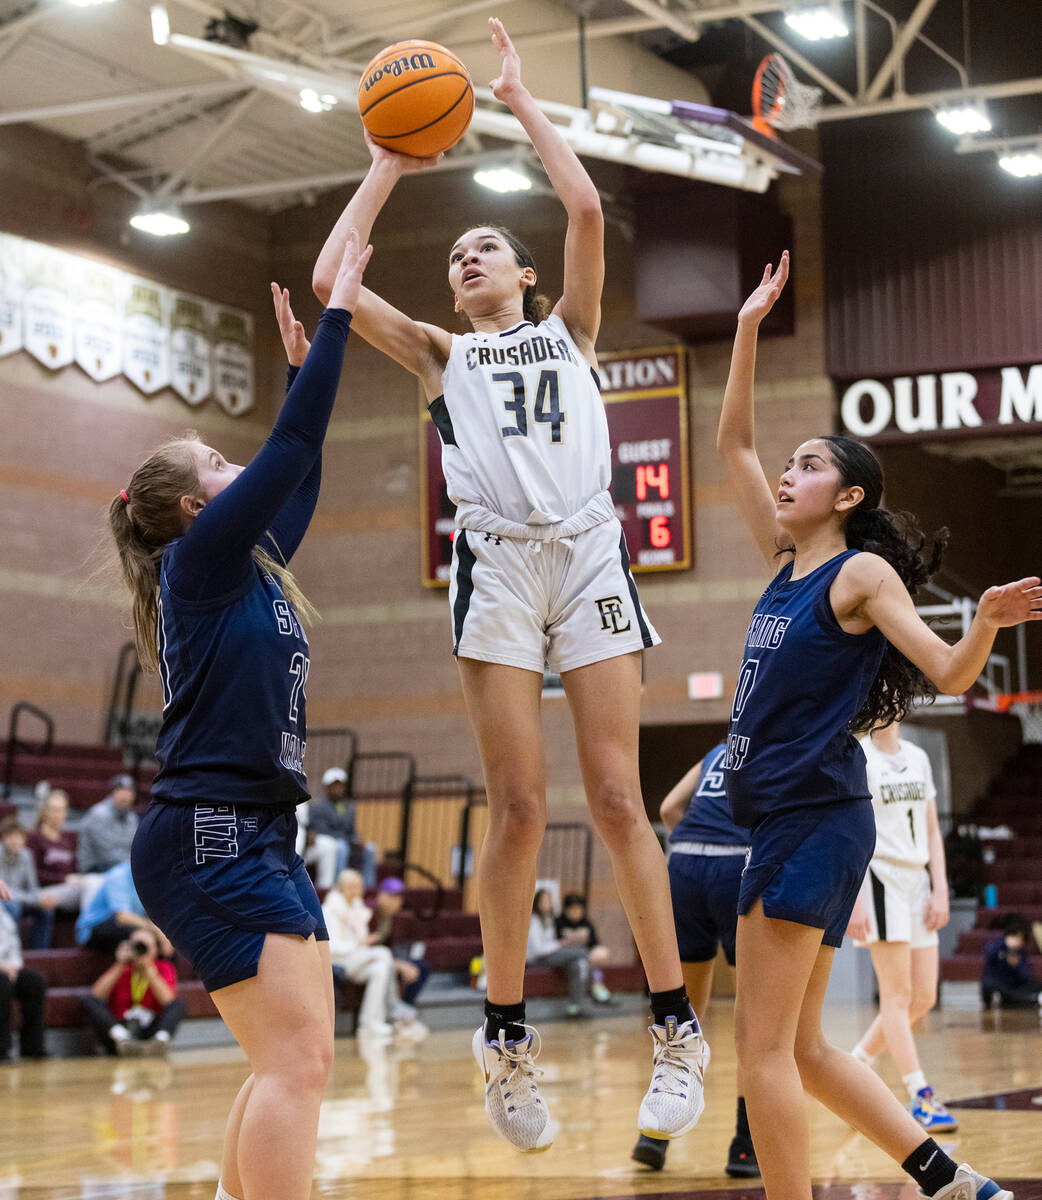 Faith Lutheran's Leah Mitchell (34) shoots for the basket between Spring Valley's high Delaney ...